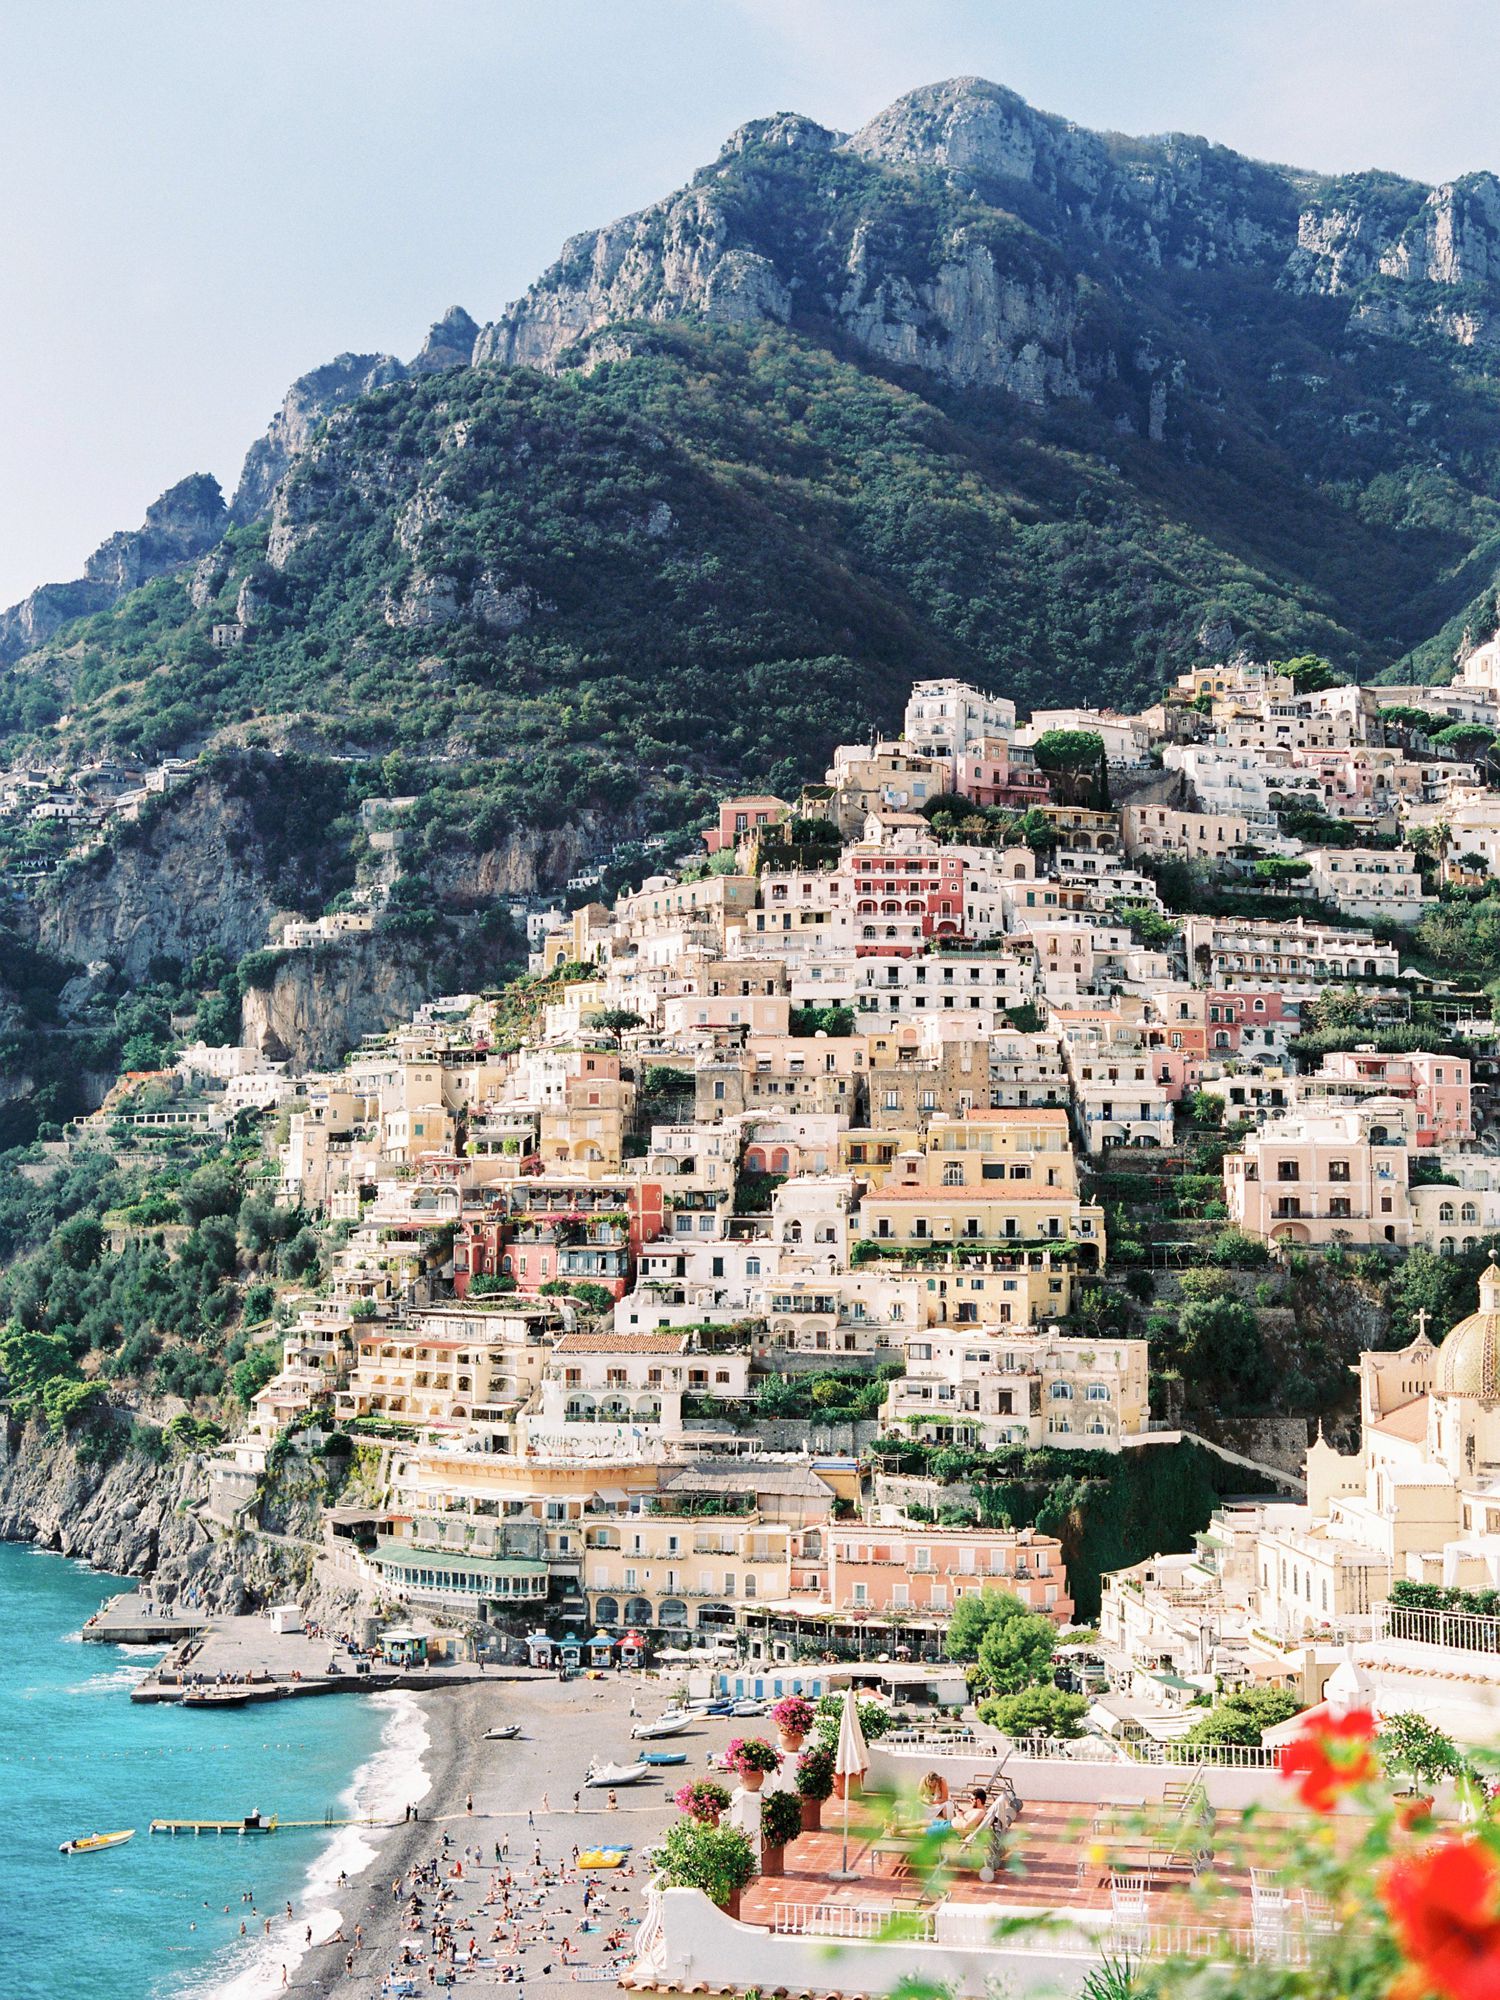 Positano view over the town